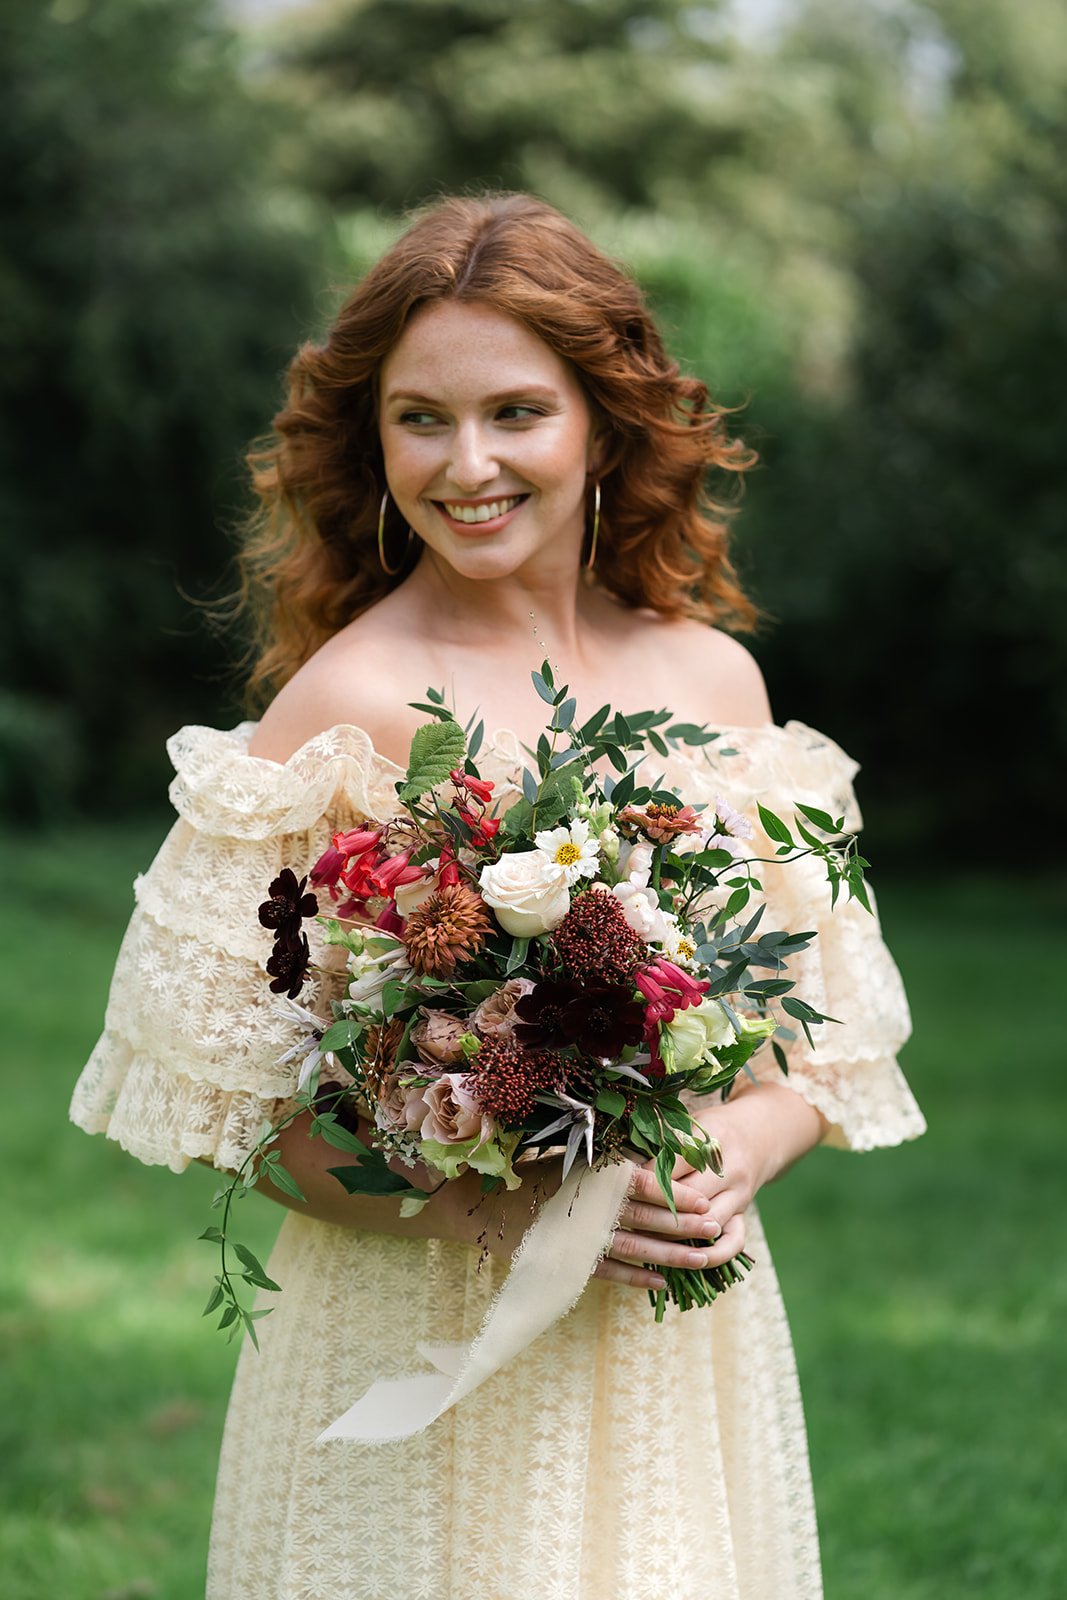 Wedding flowers course bride with bridal bouquet